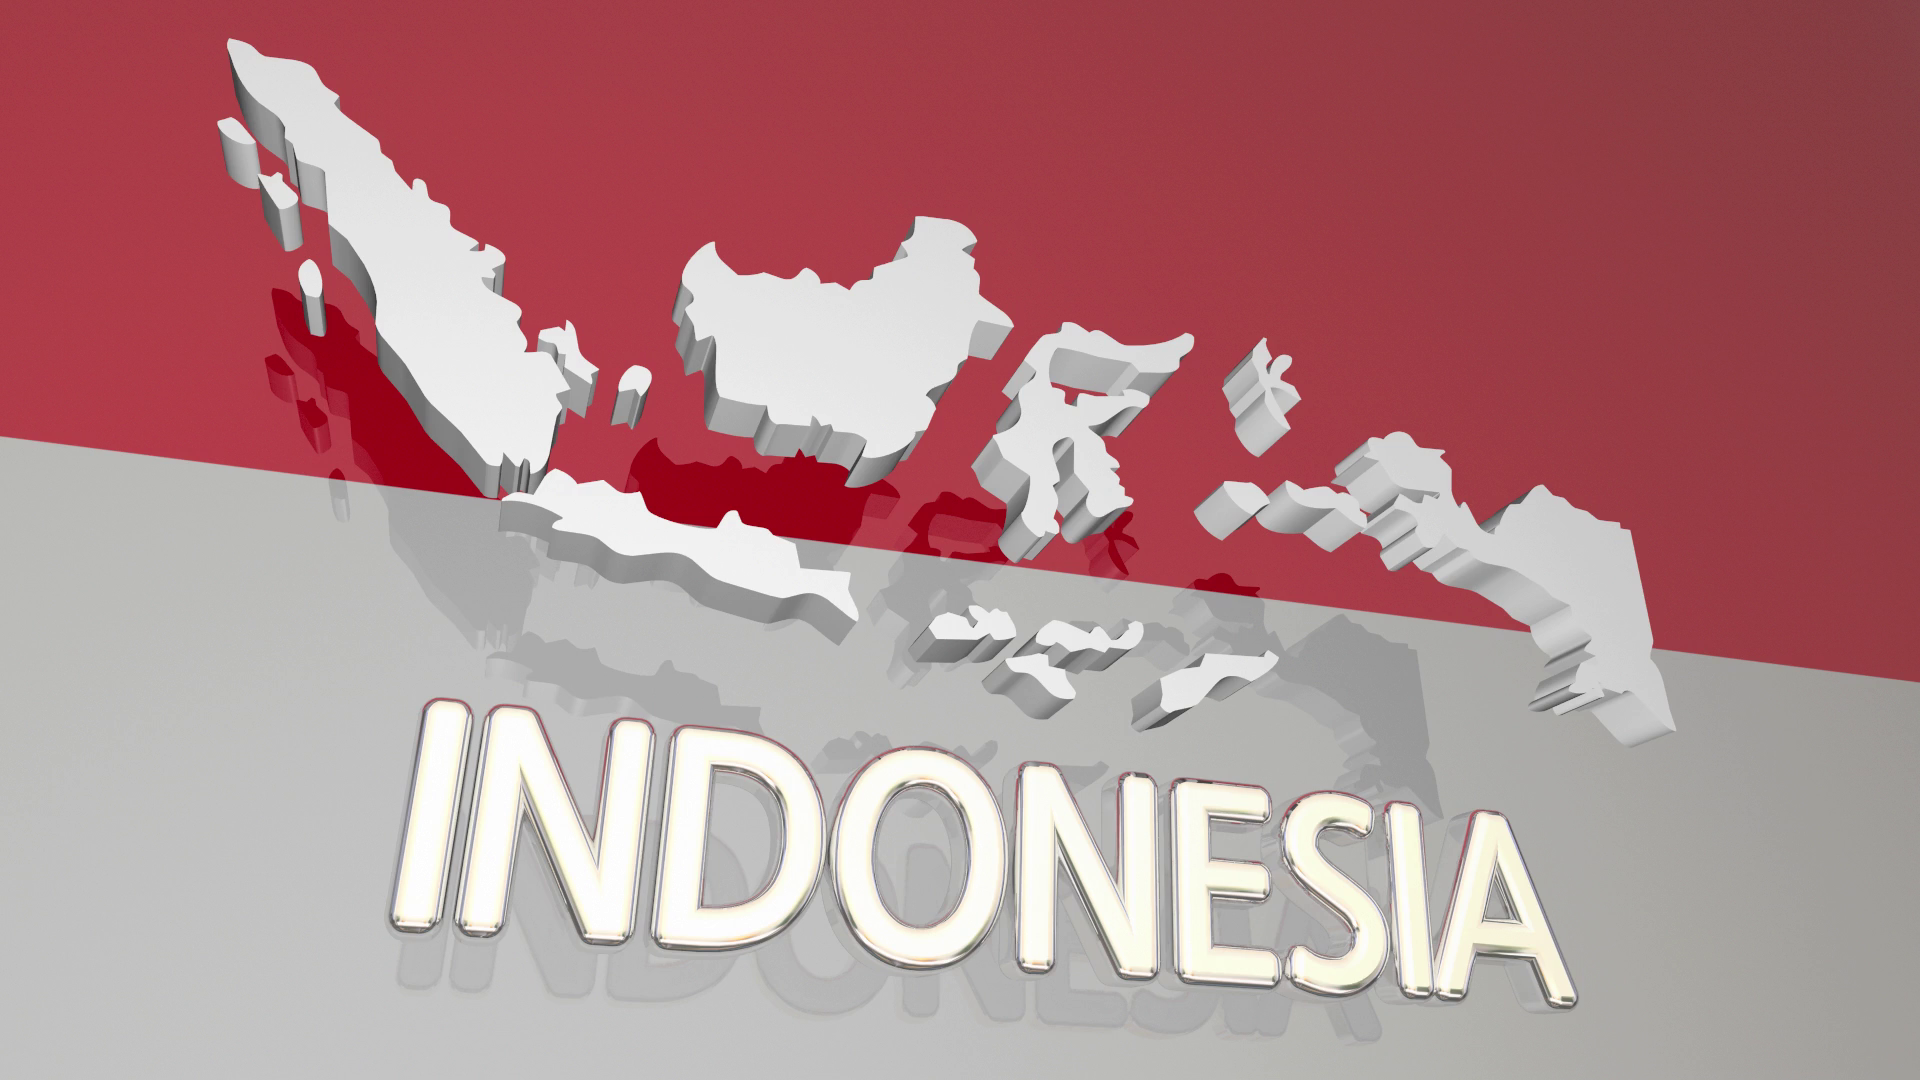 videoblocks-indonesia-country-nation-map-asia-flag-3-d-animation_sxuekceng_thumbnail-full11.png